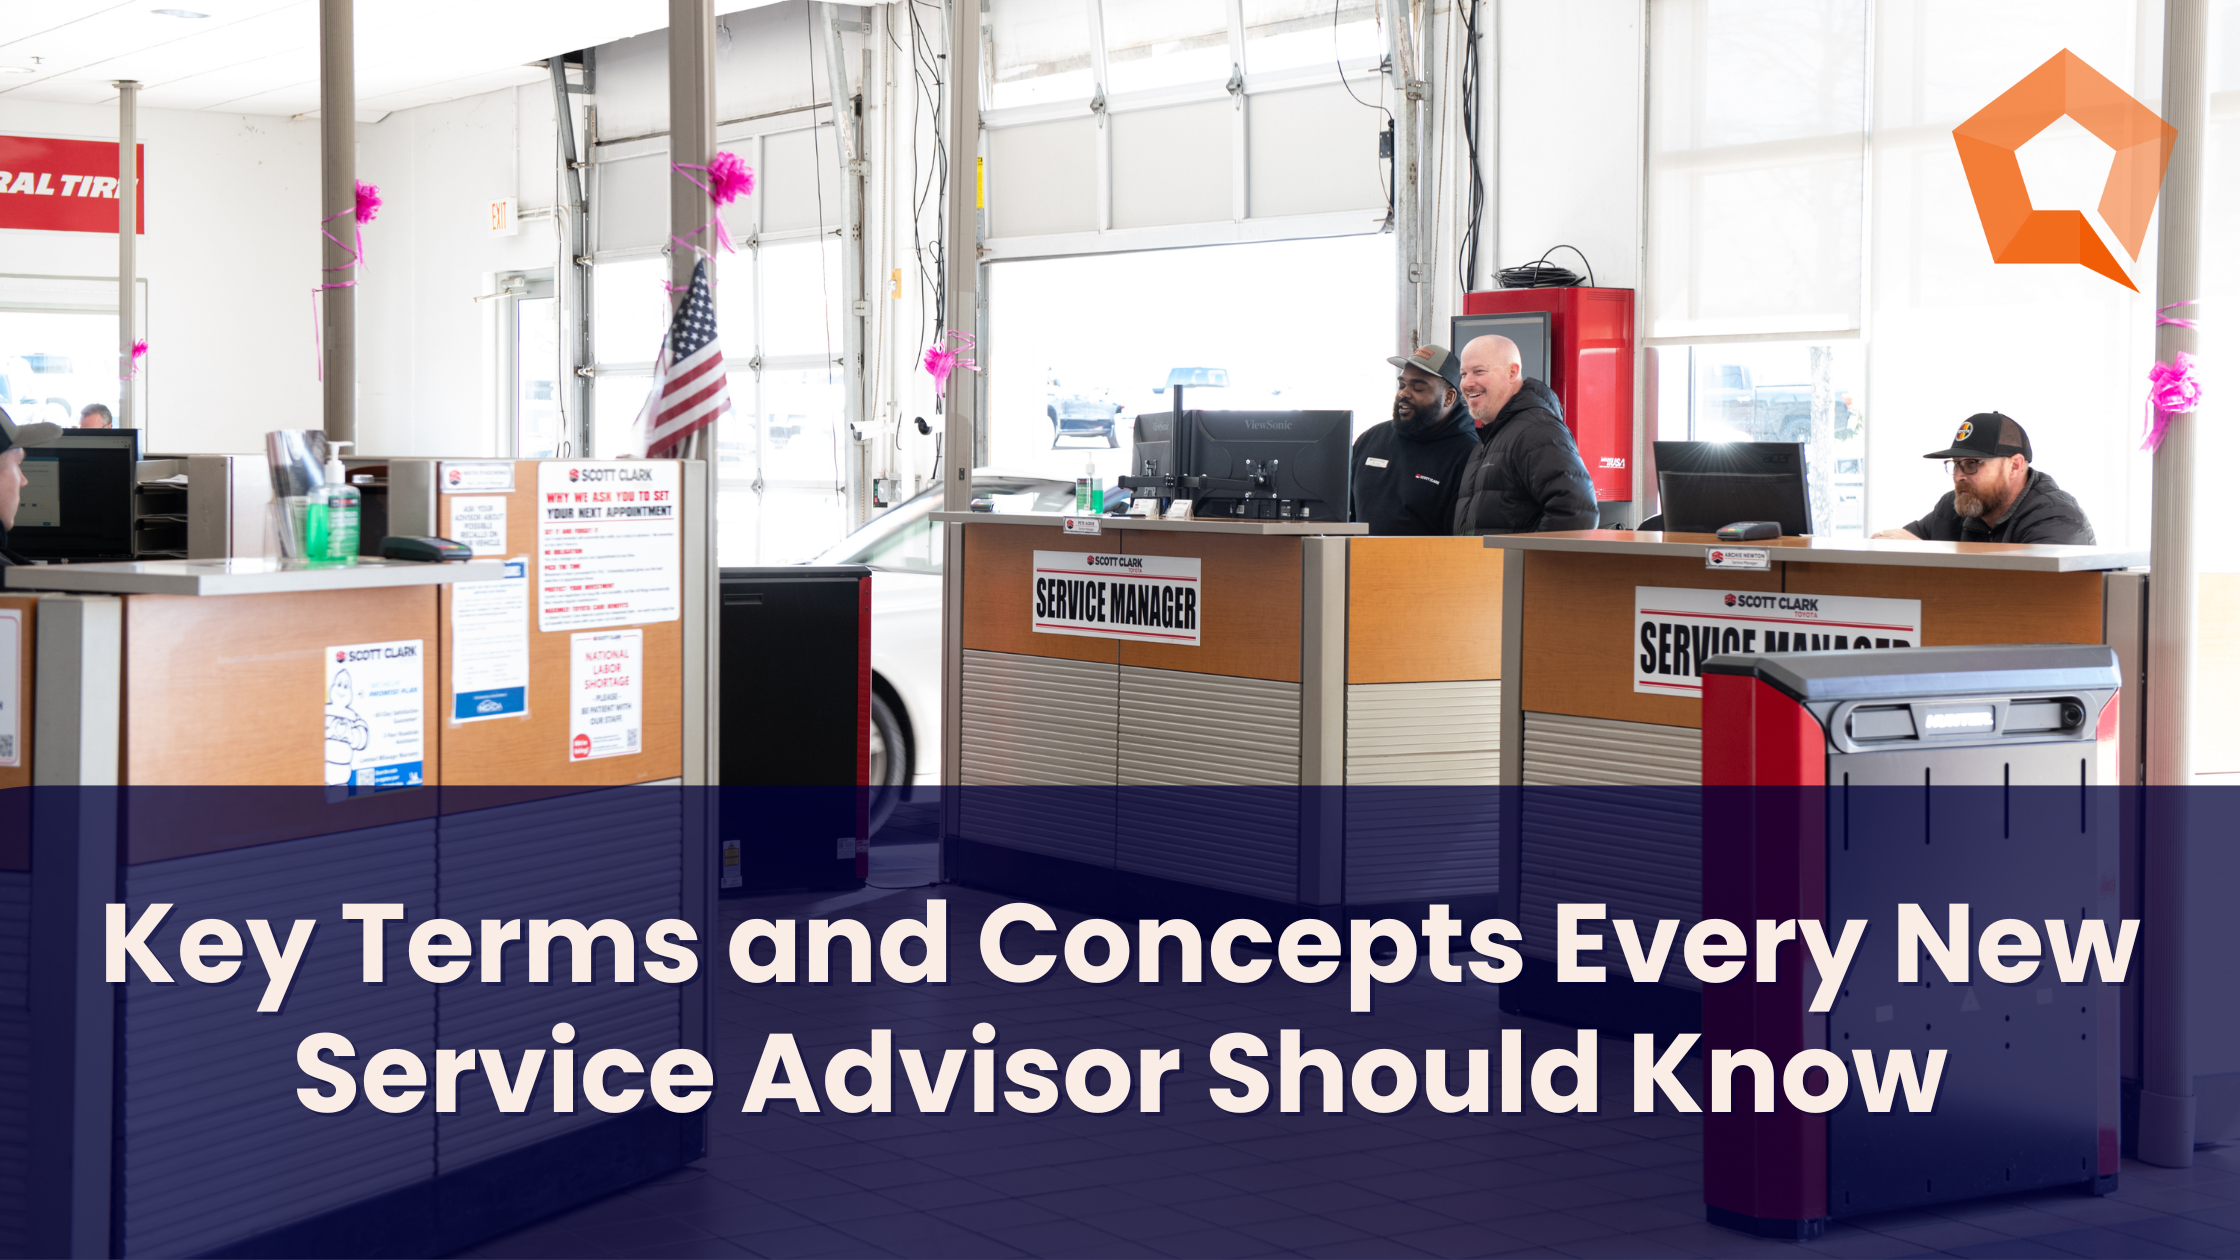 Key Terms and Concepts Every New Service Advisor Should Know